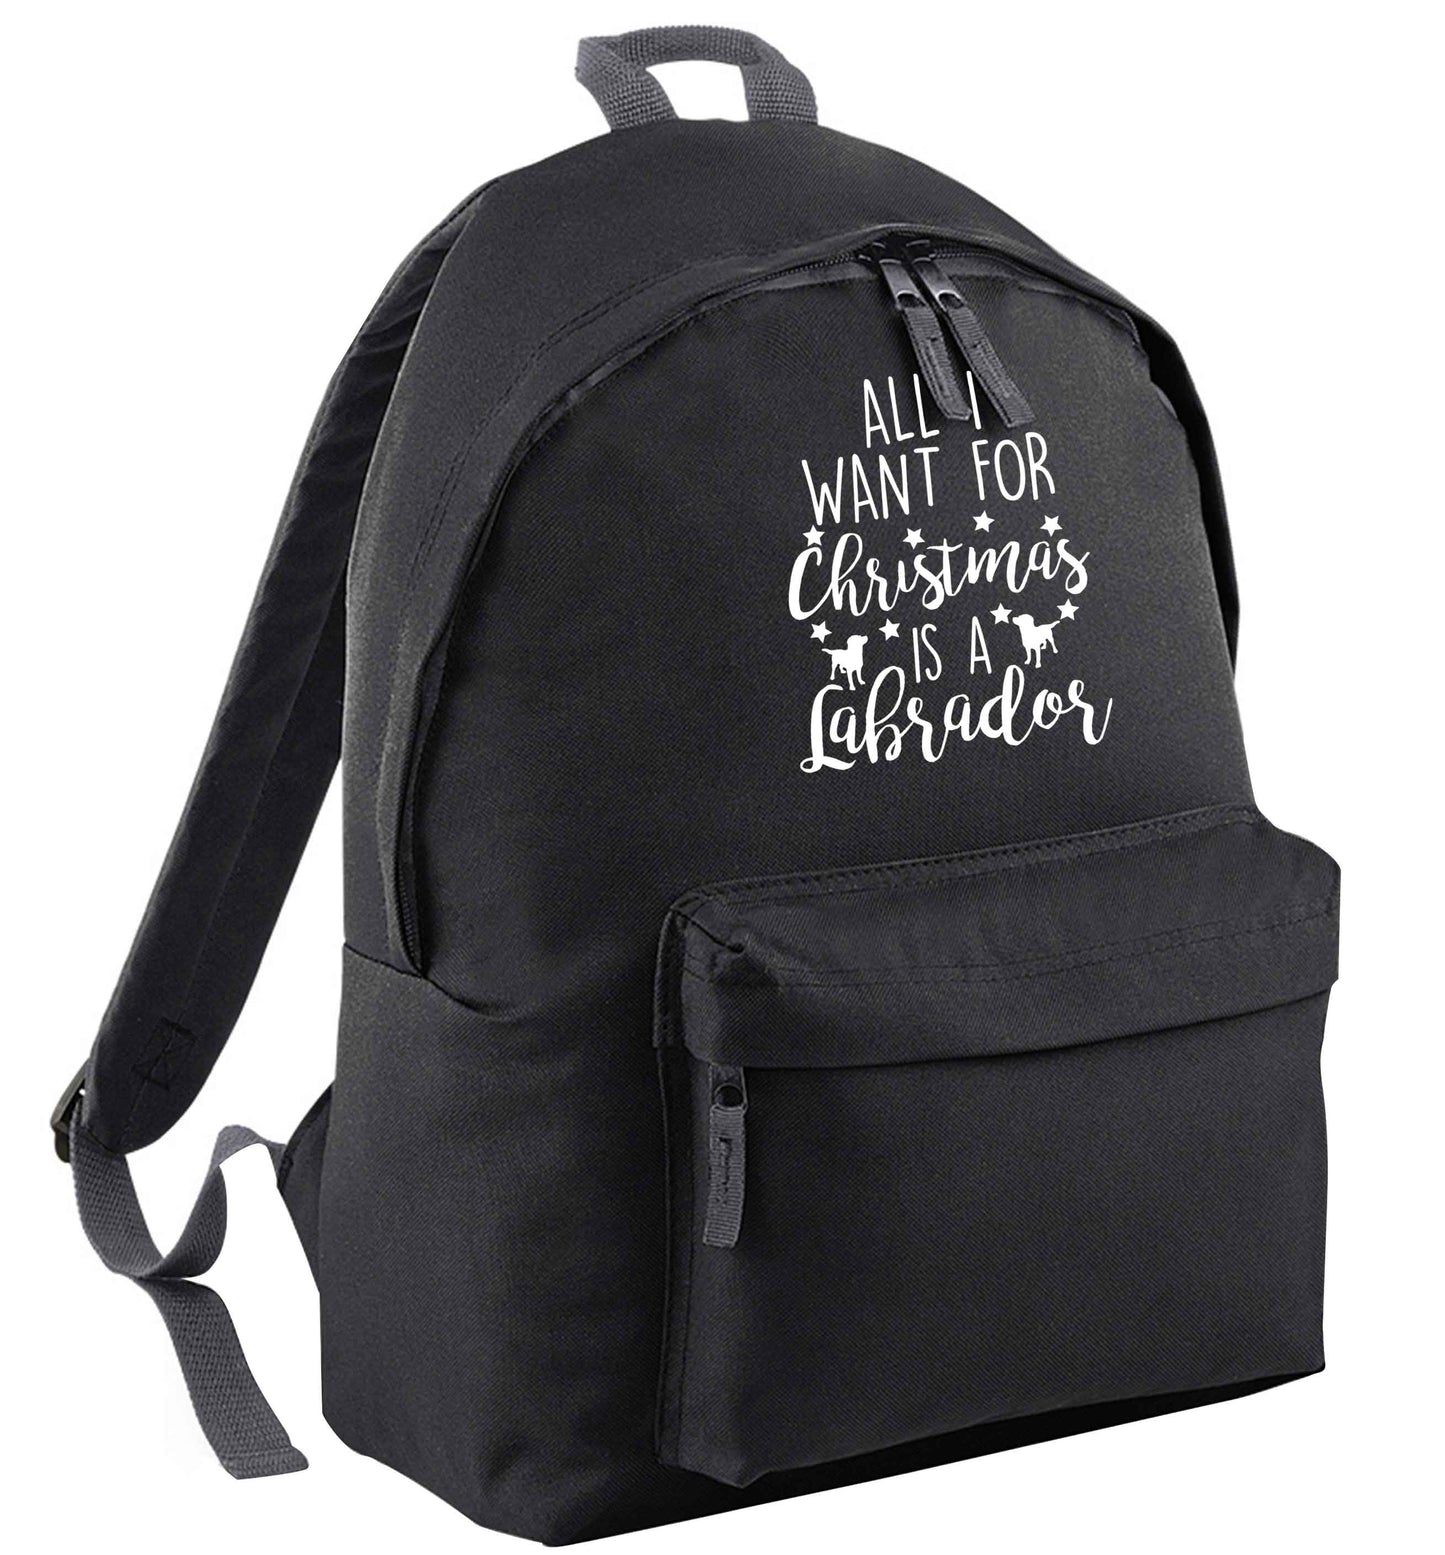 All I want for Christmas is a labrador black adults backpack